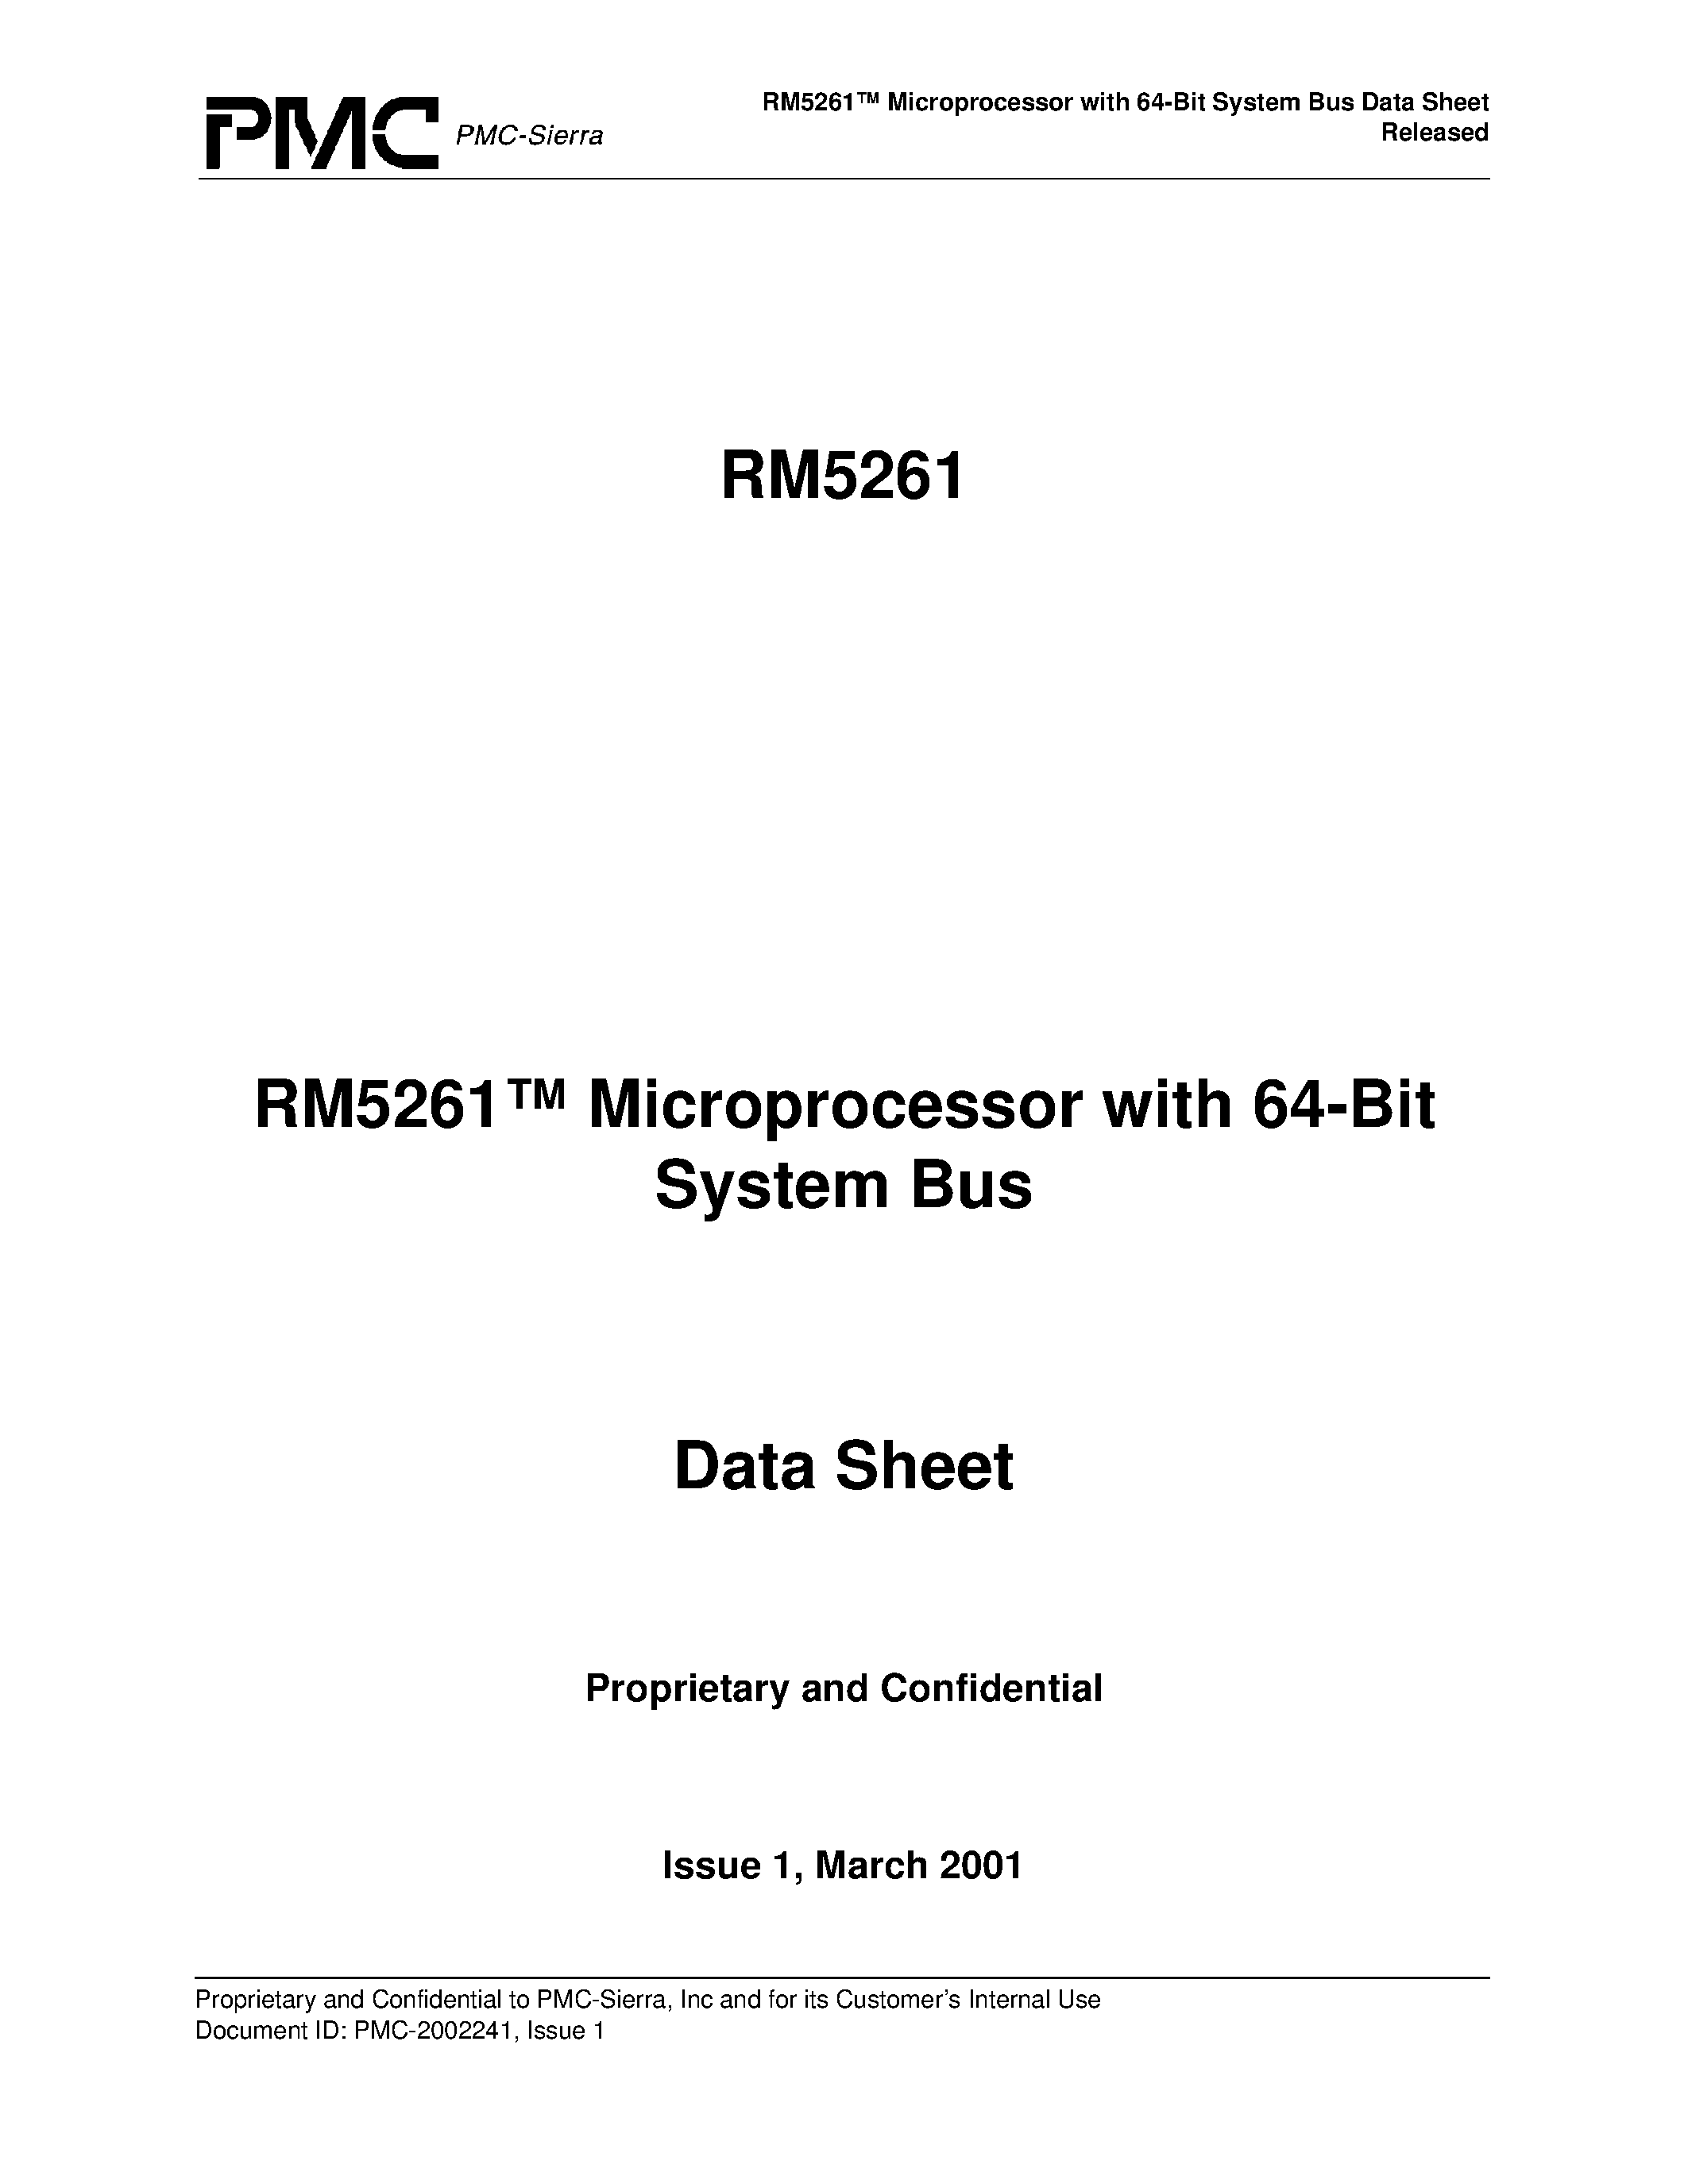 Datasheet RM5261-250-Q - RM5261 Microprocessor with 64-Bit System Bus Data Sheet Released page 1